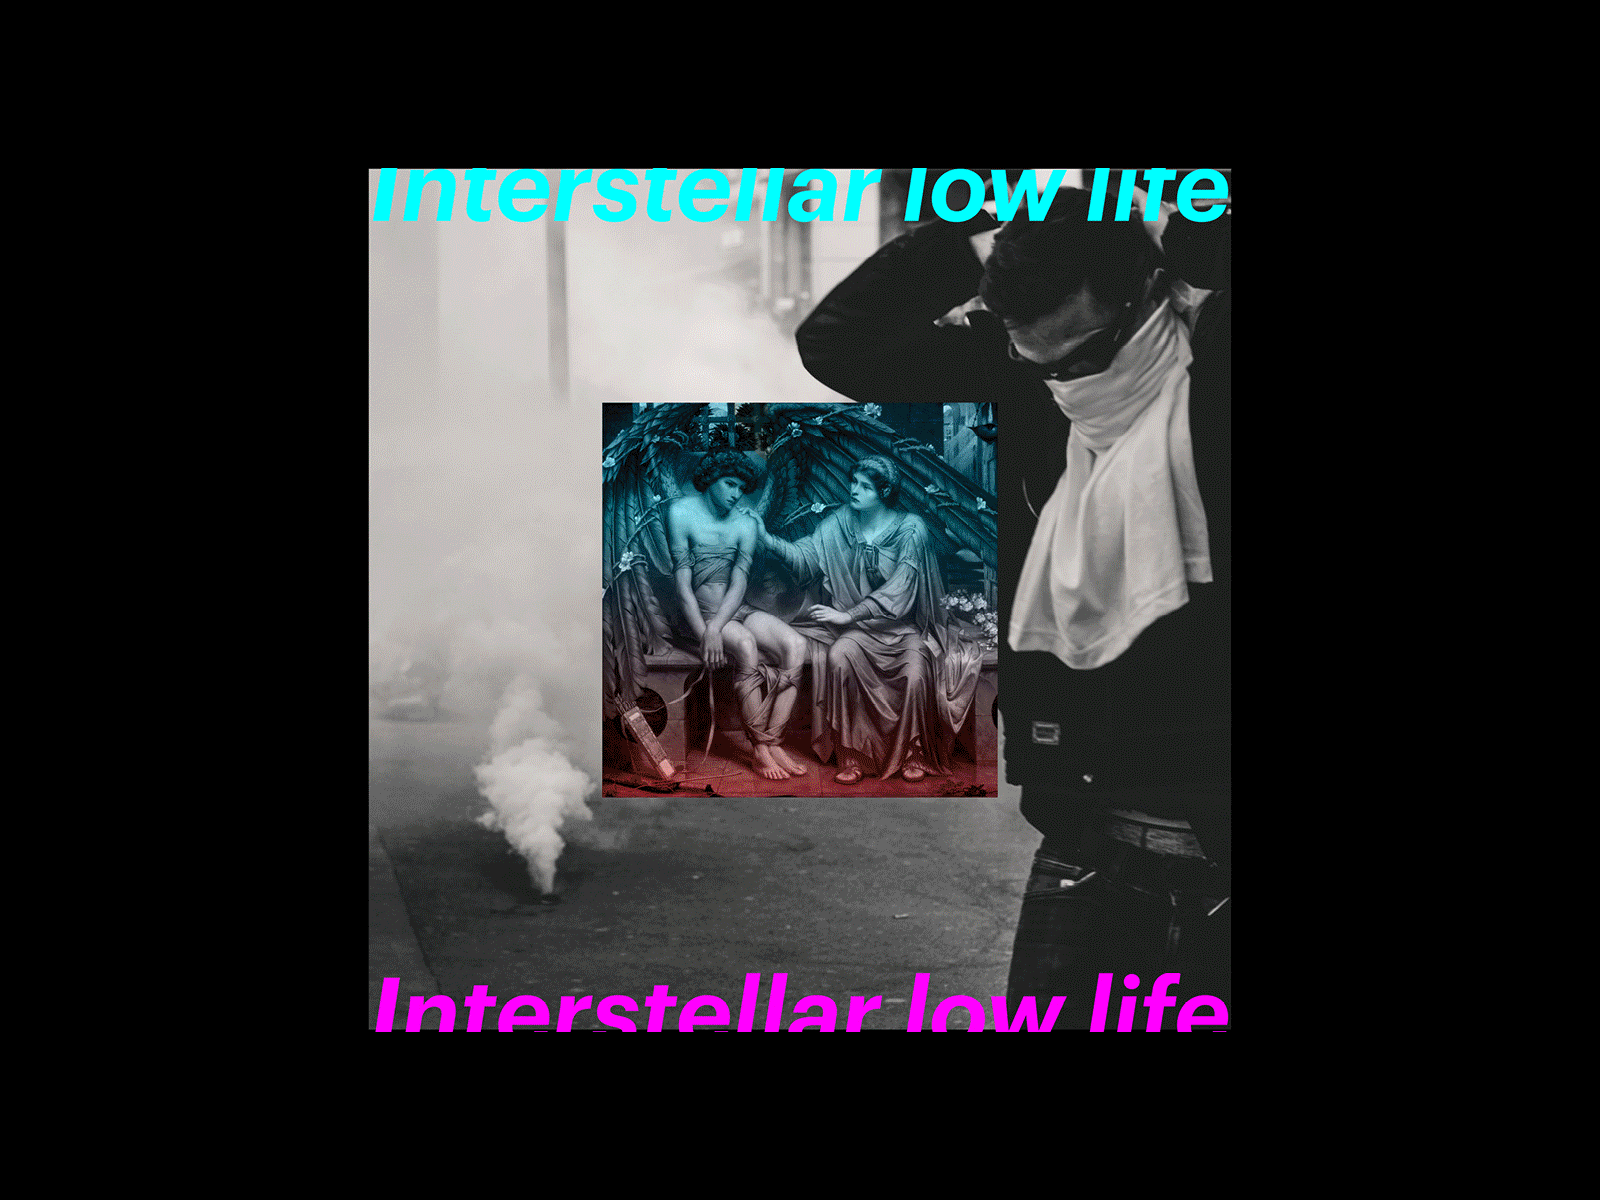 Experimental Cover Art cover art cover artwork design experimental layout music art typography